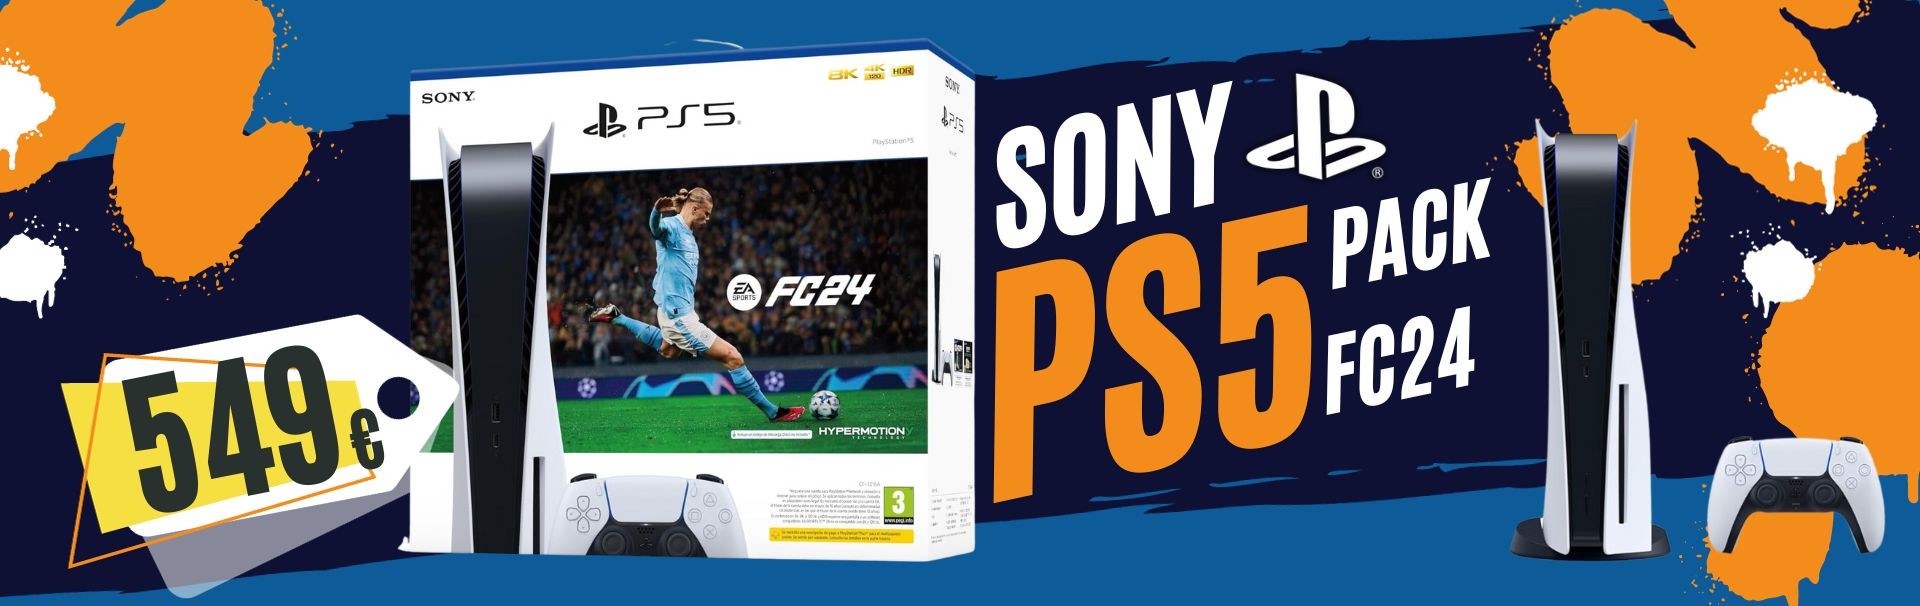 Pack Sony PS5 FC24